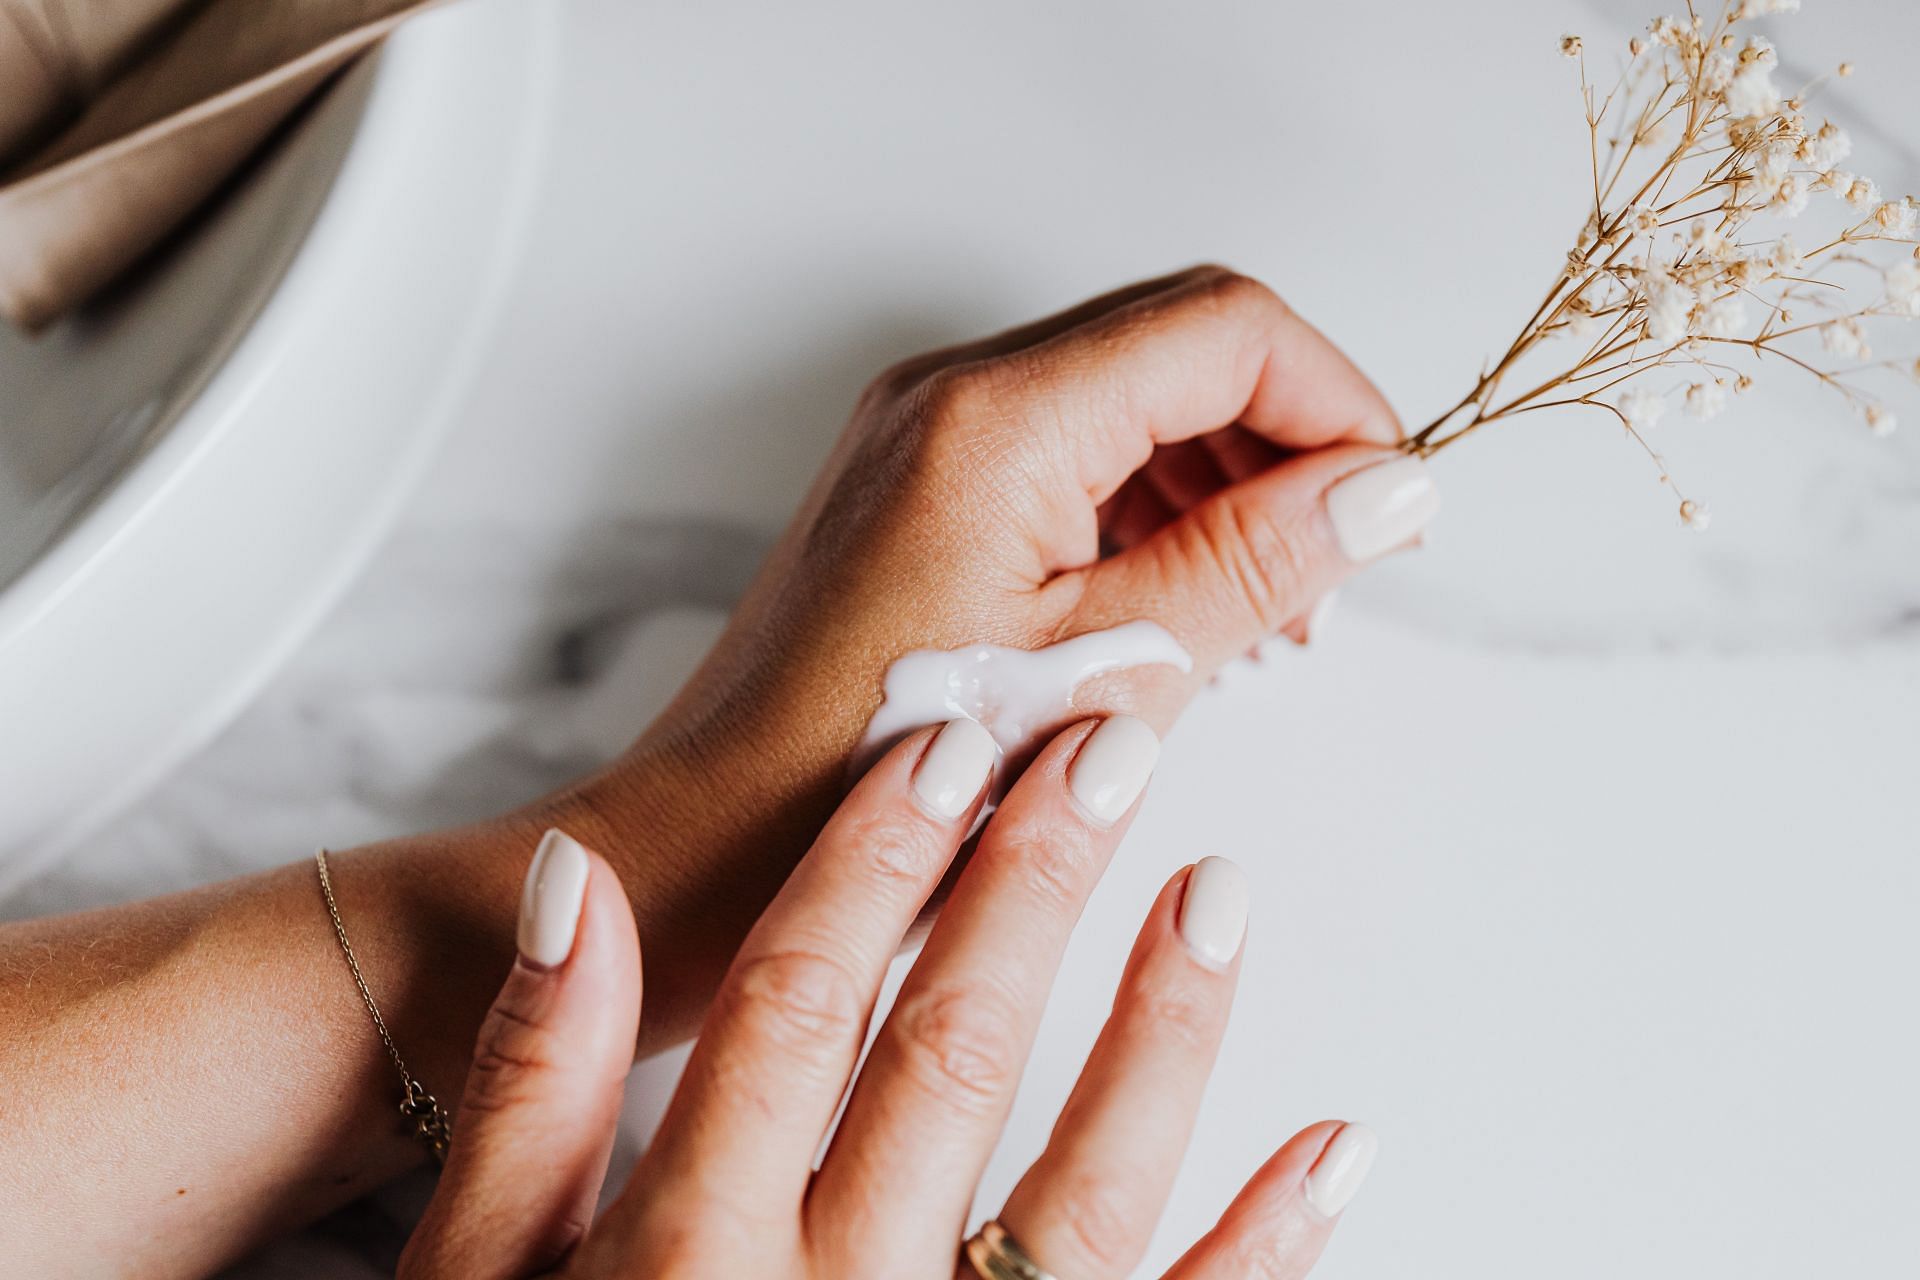 Moisturizing is one of the ways to get rid of cracked hands and feet (Image via Pexels)